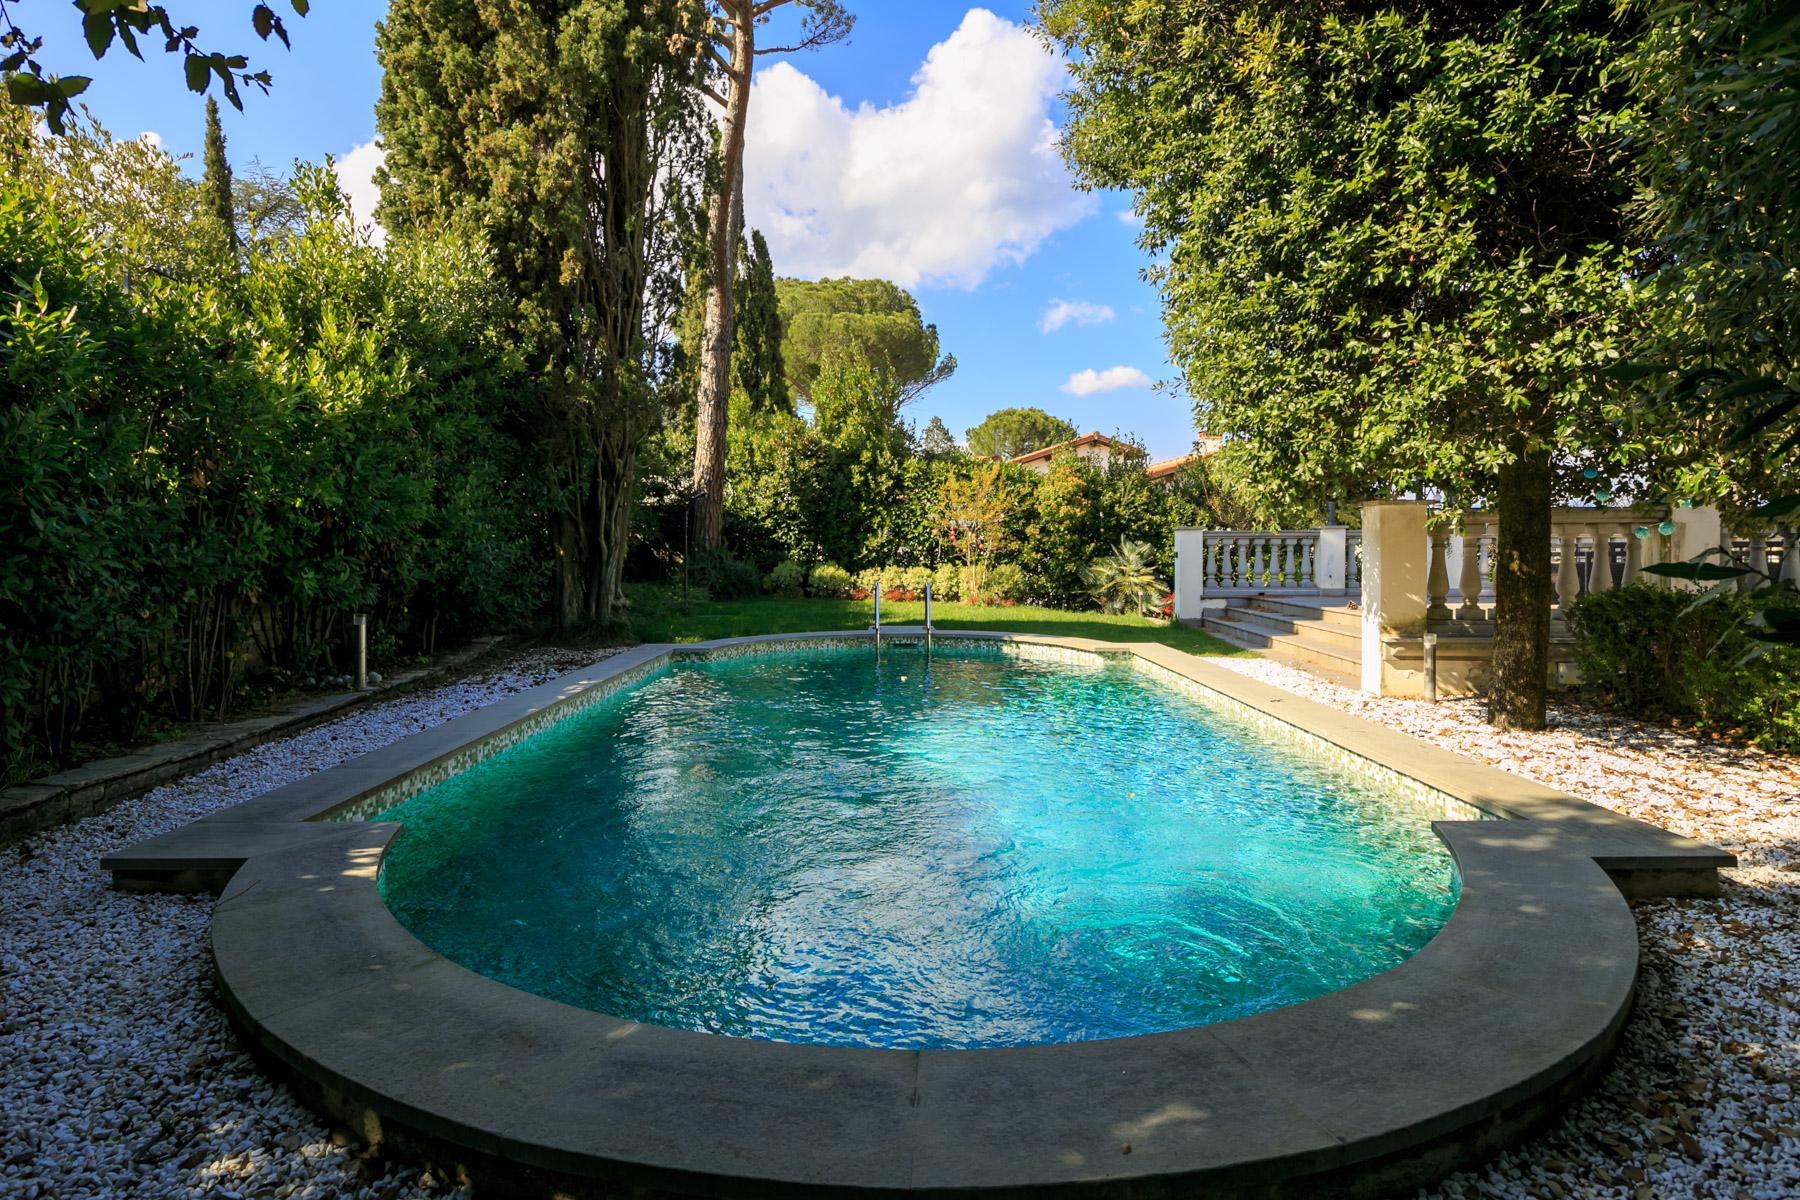 Splendid villa with pool on the Poggio Imperiale hill in Florence - 7